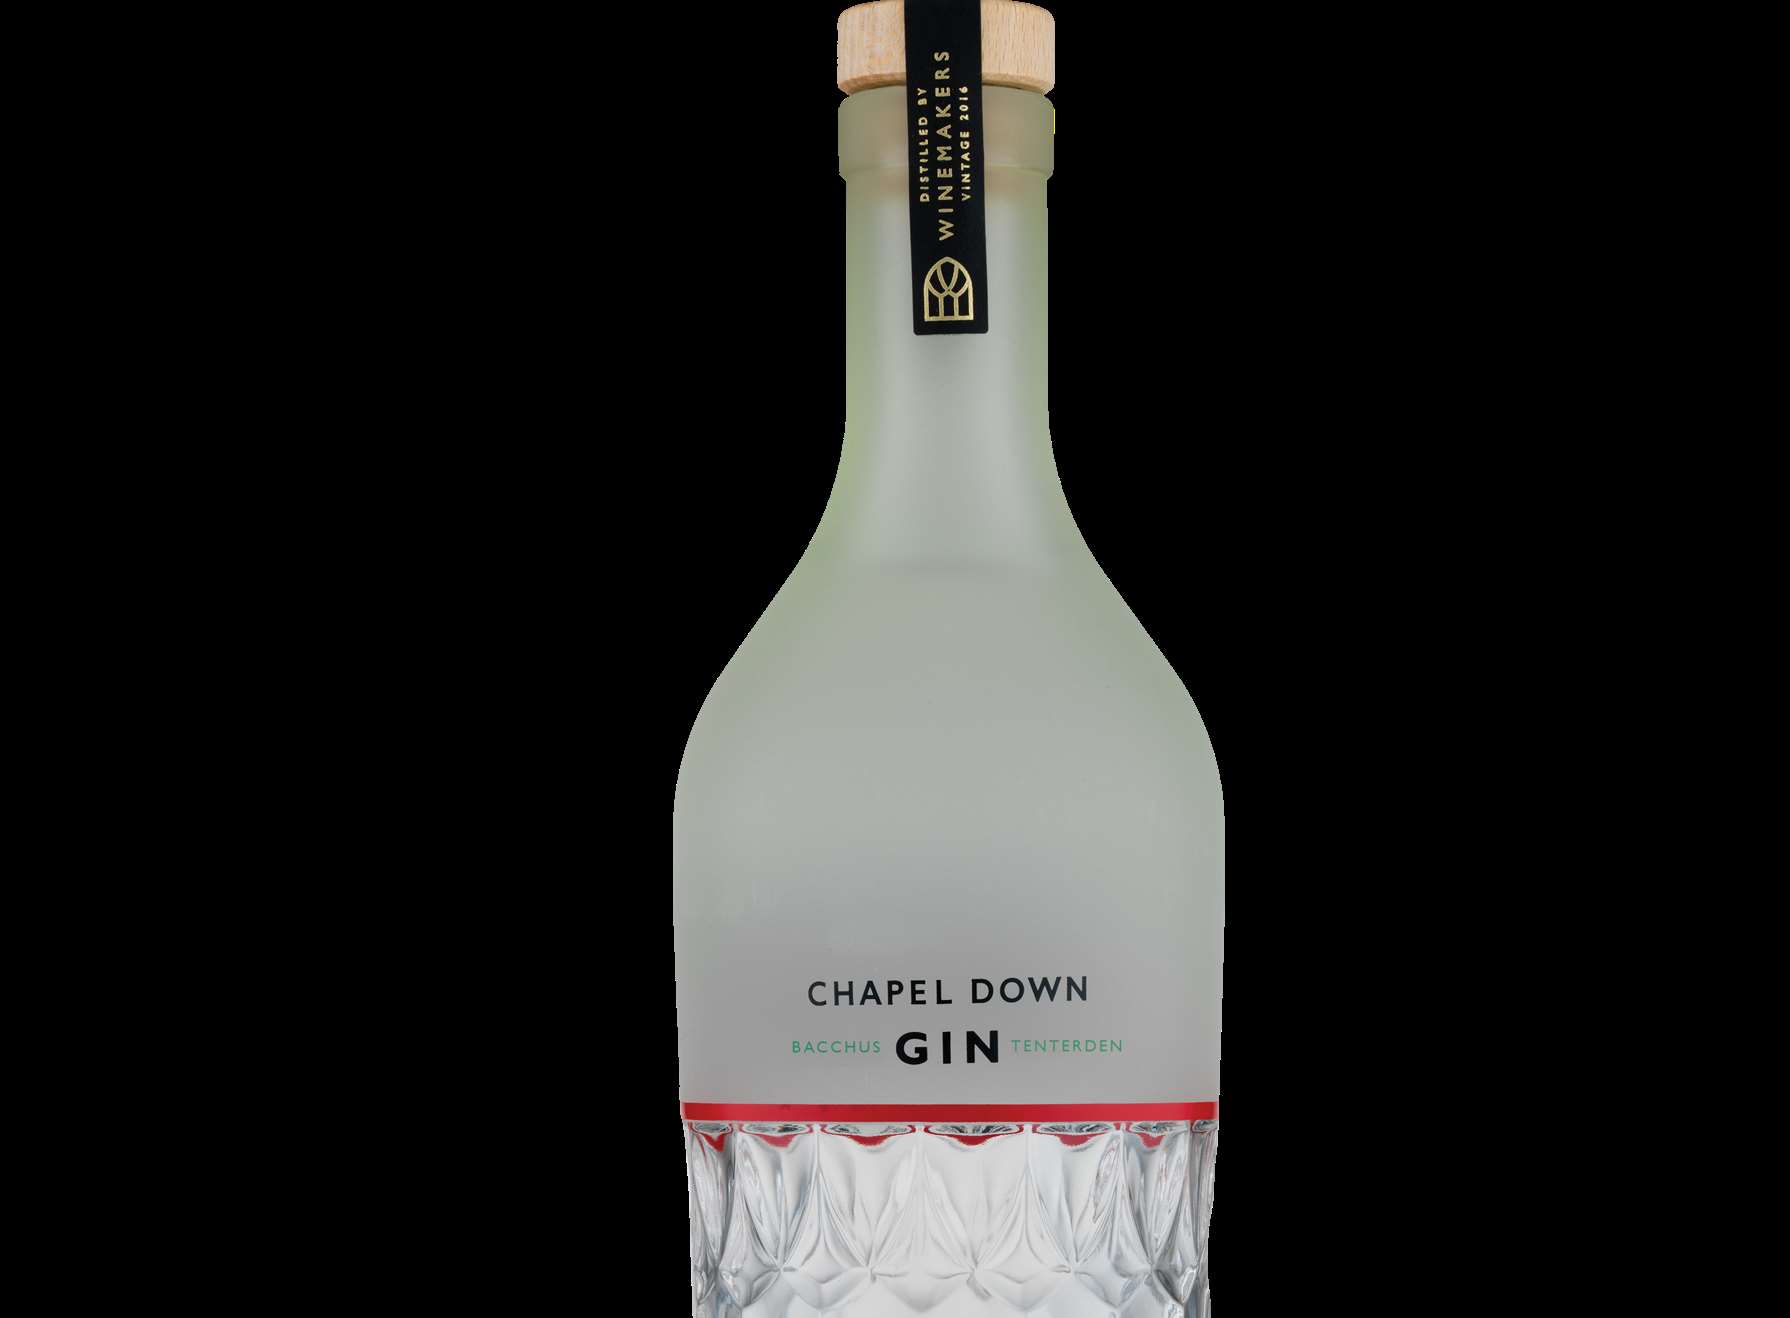 Chapel Down has launched Bacchus Gin